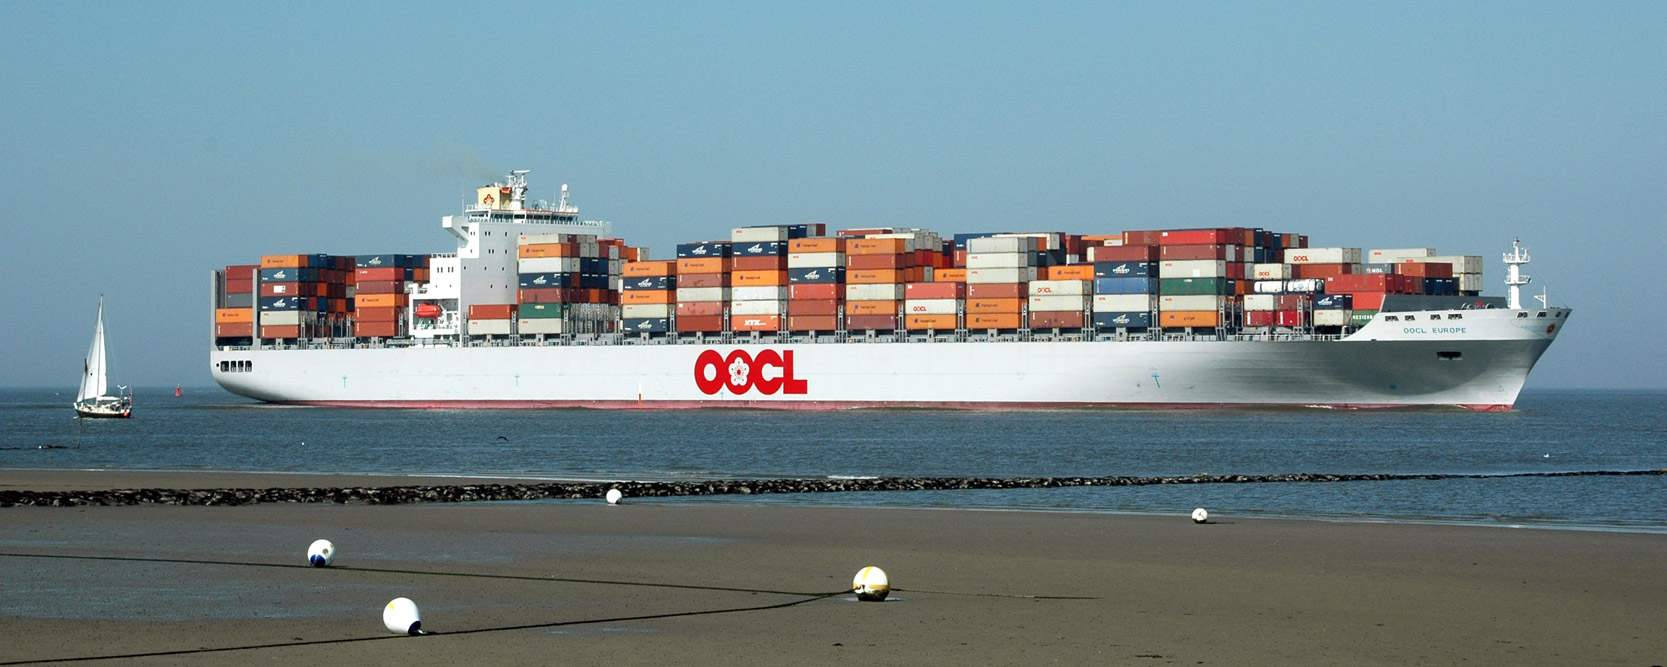 oocl-europe_1020-1000